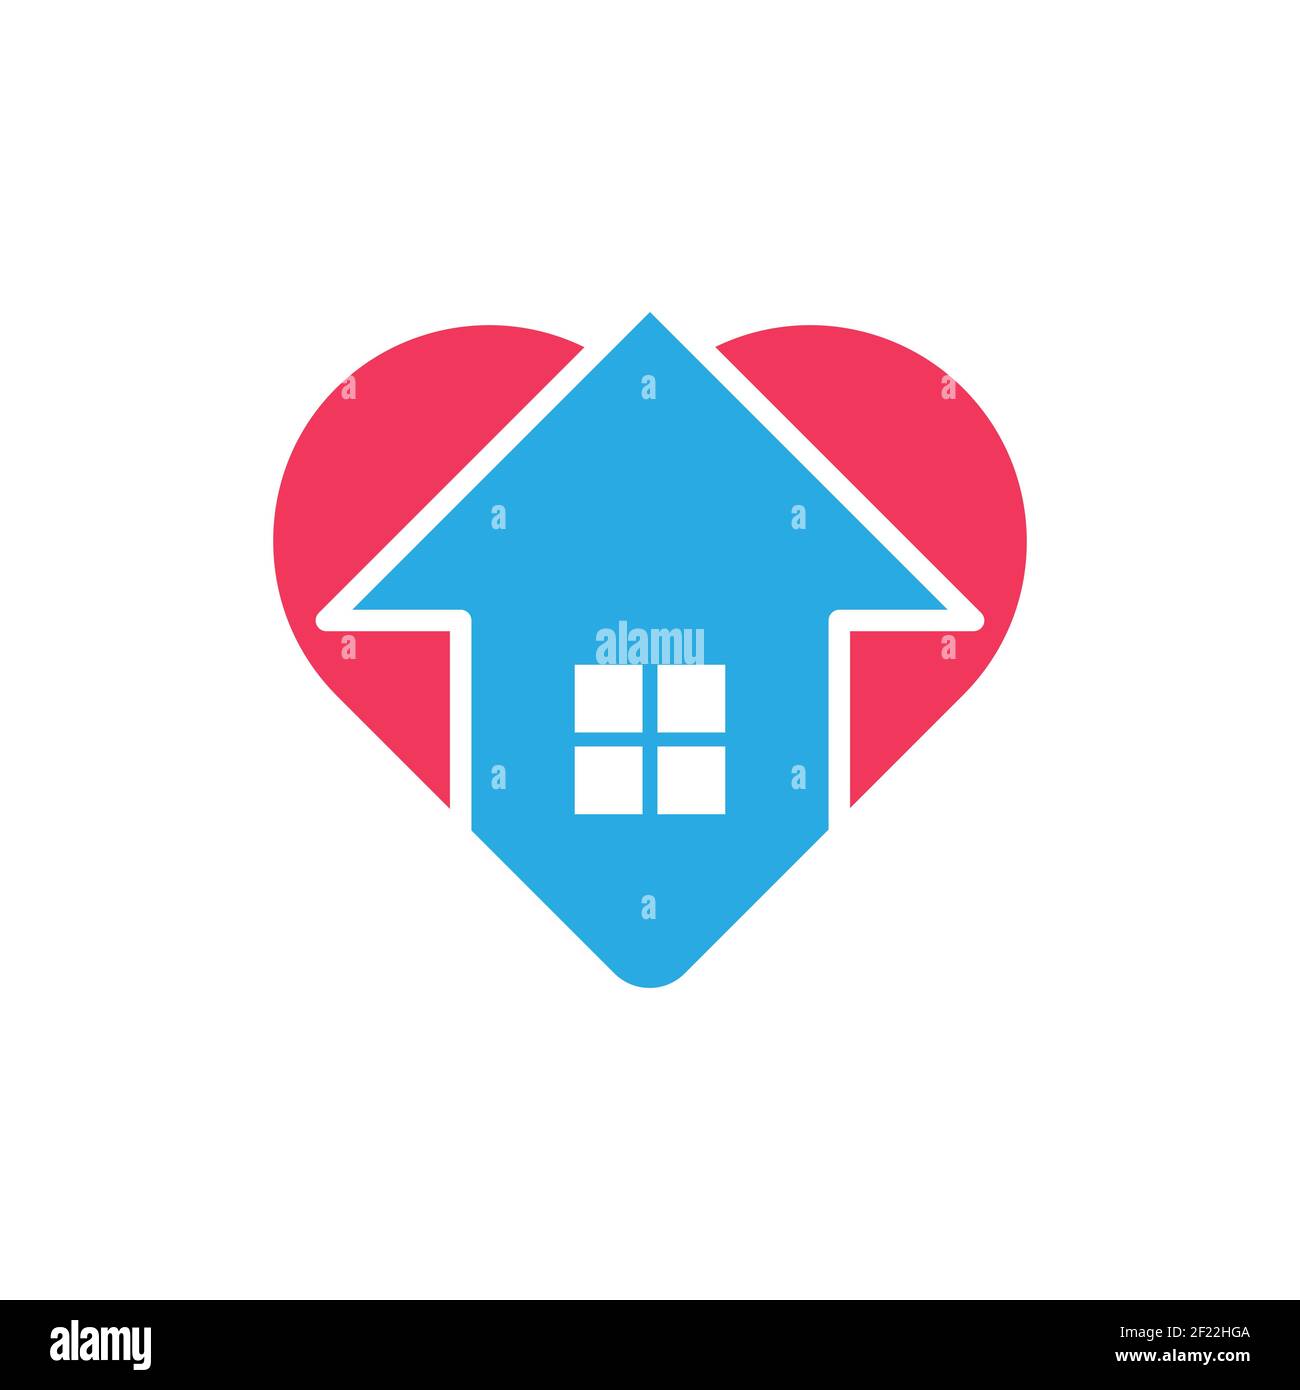 Stay at Home Logo Icon Vector design illustration. Home with Love icon design concept. Home with heart shape icons shows messages 'stay home' or 'stay Stock Vector